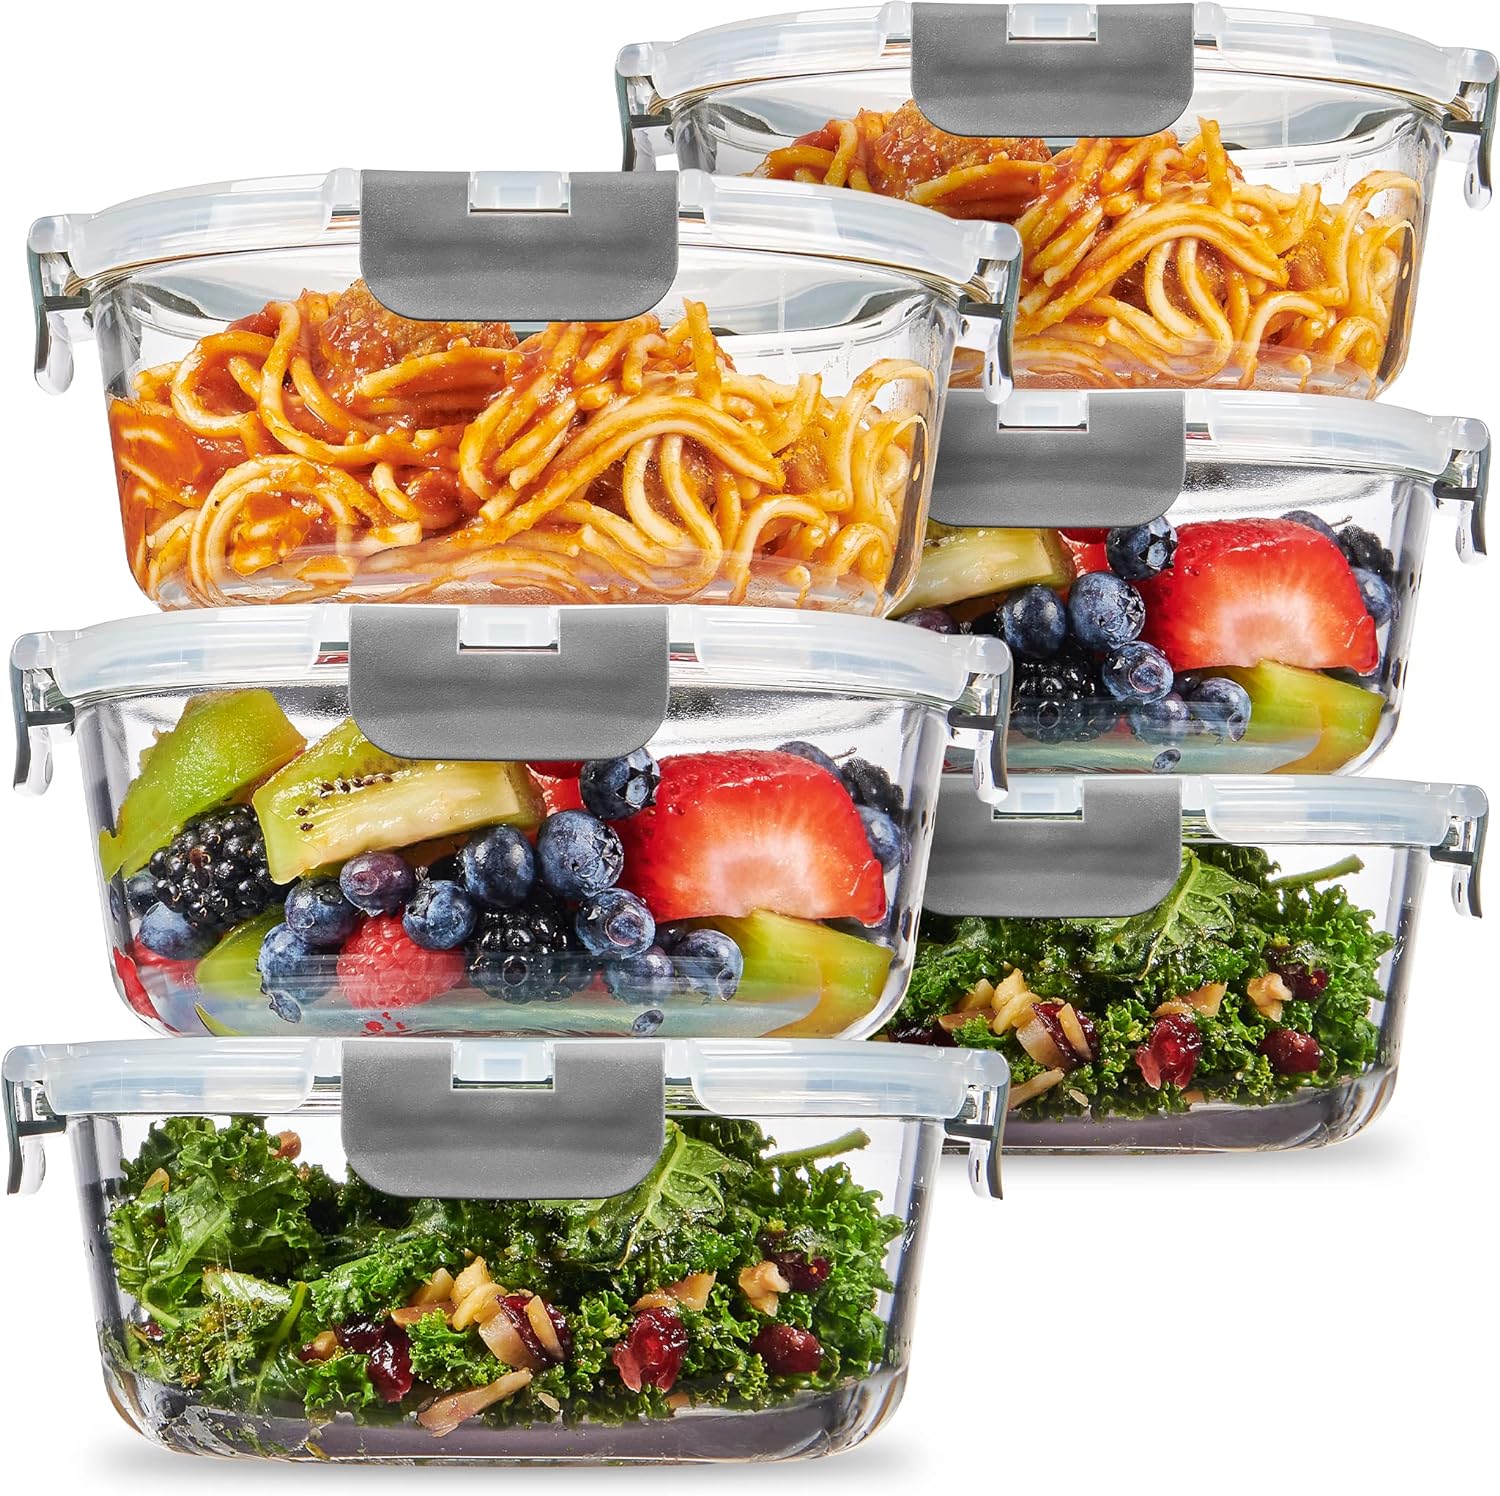 FineDine 12-Piece Superior Glass Food Storage Containers Set, 32oz Capacity - Newly Innovated Hinged Locking lids - 100% Leakproof Glass Meal-Prep Containers, Freezer-to-Oven-Safe (Grey)